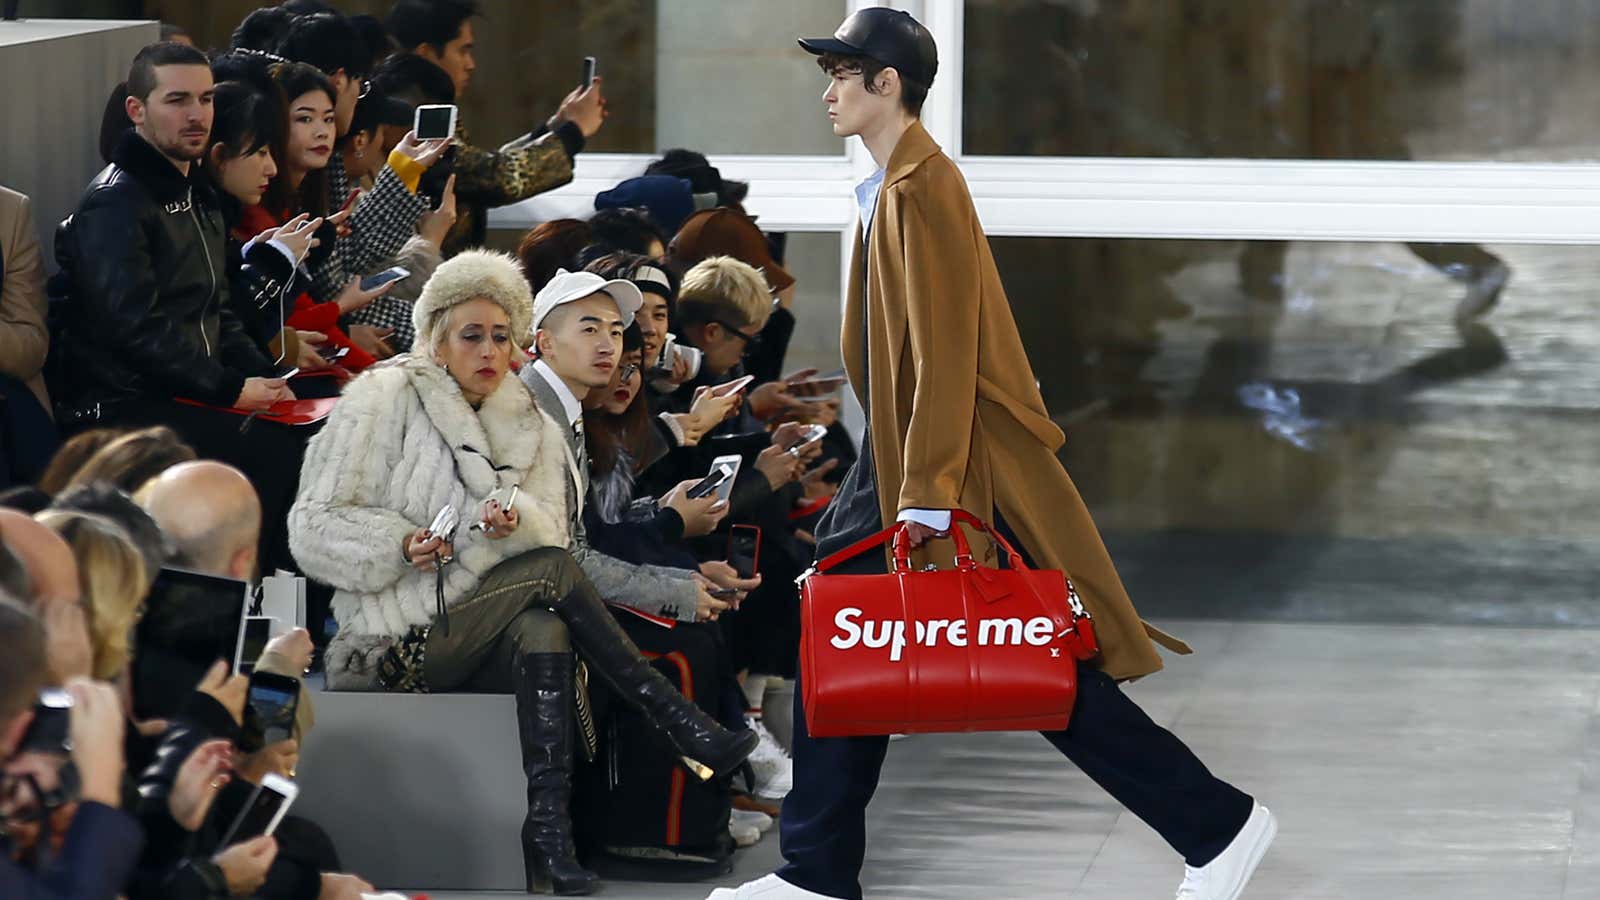 In Supreme's collaboration with Louis Vuitton, high fashion streetwear have fully merged